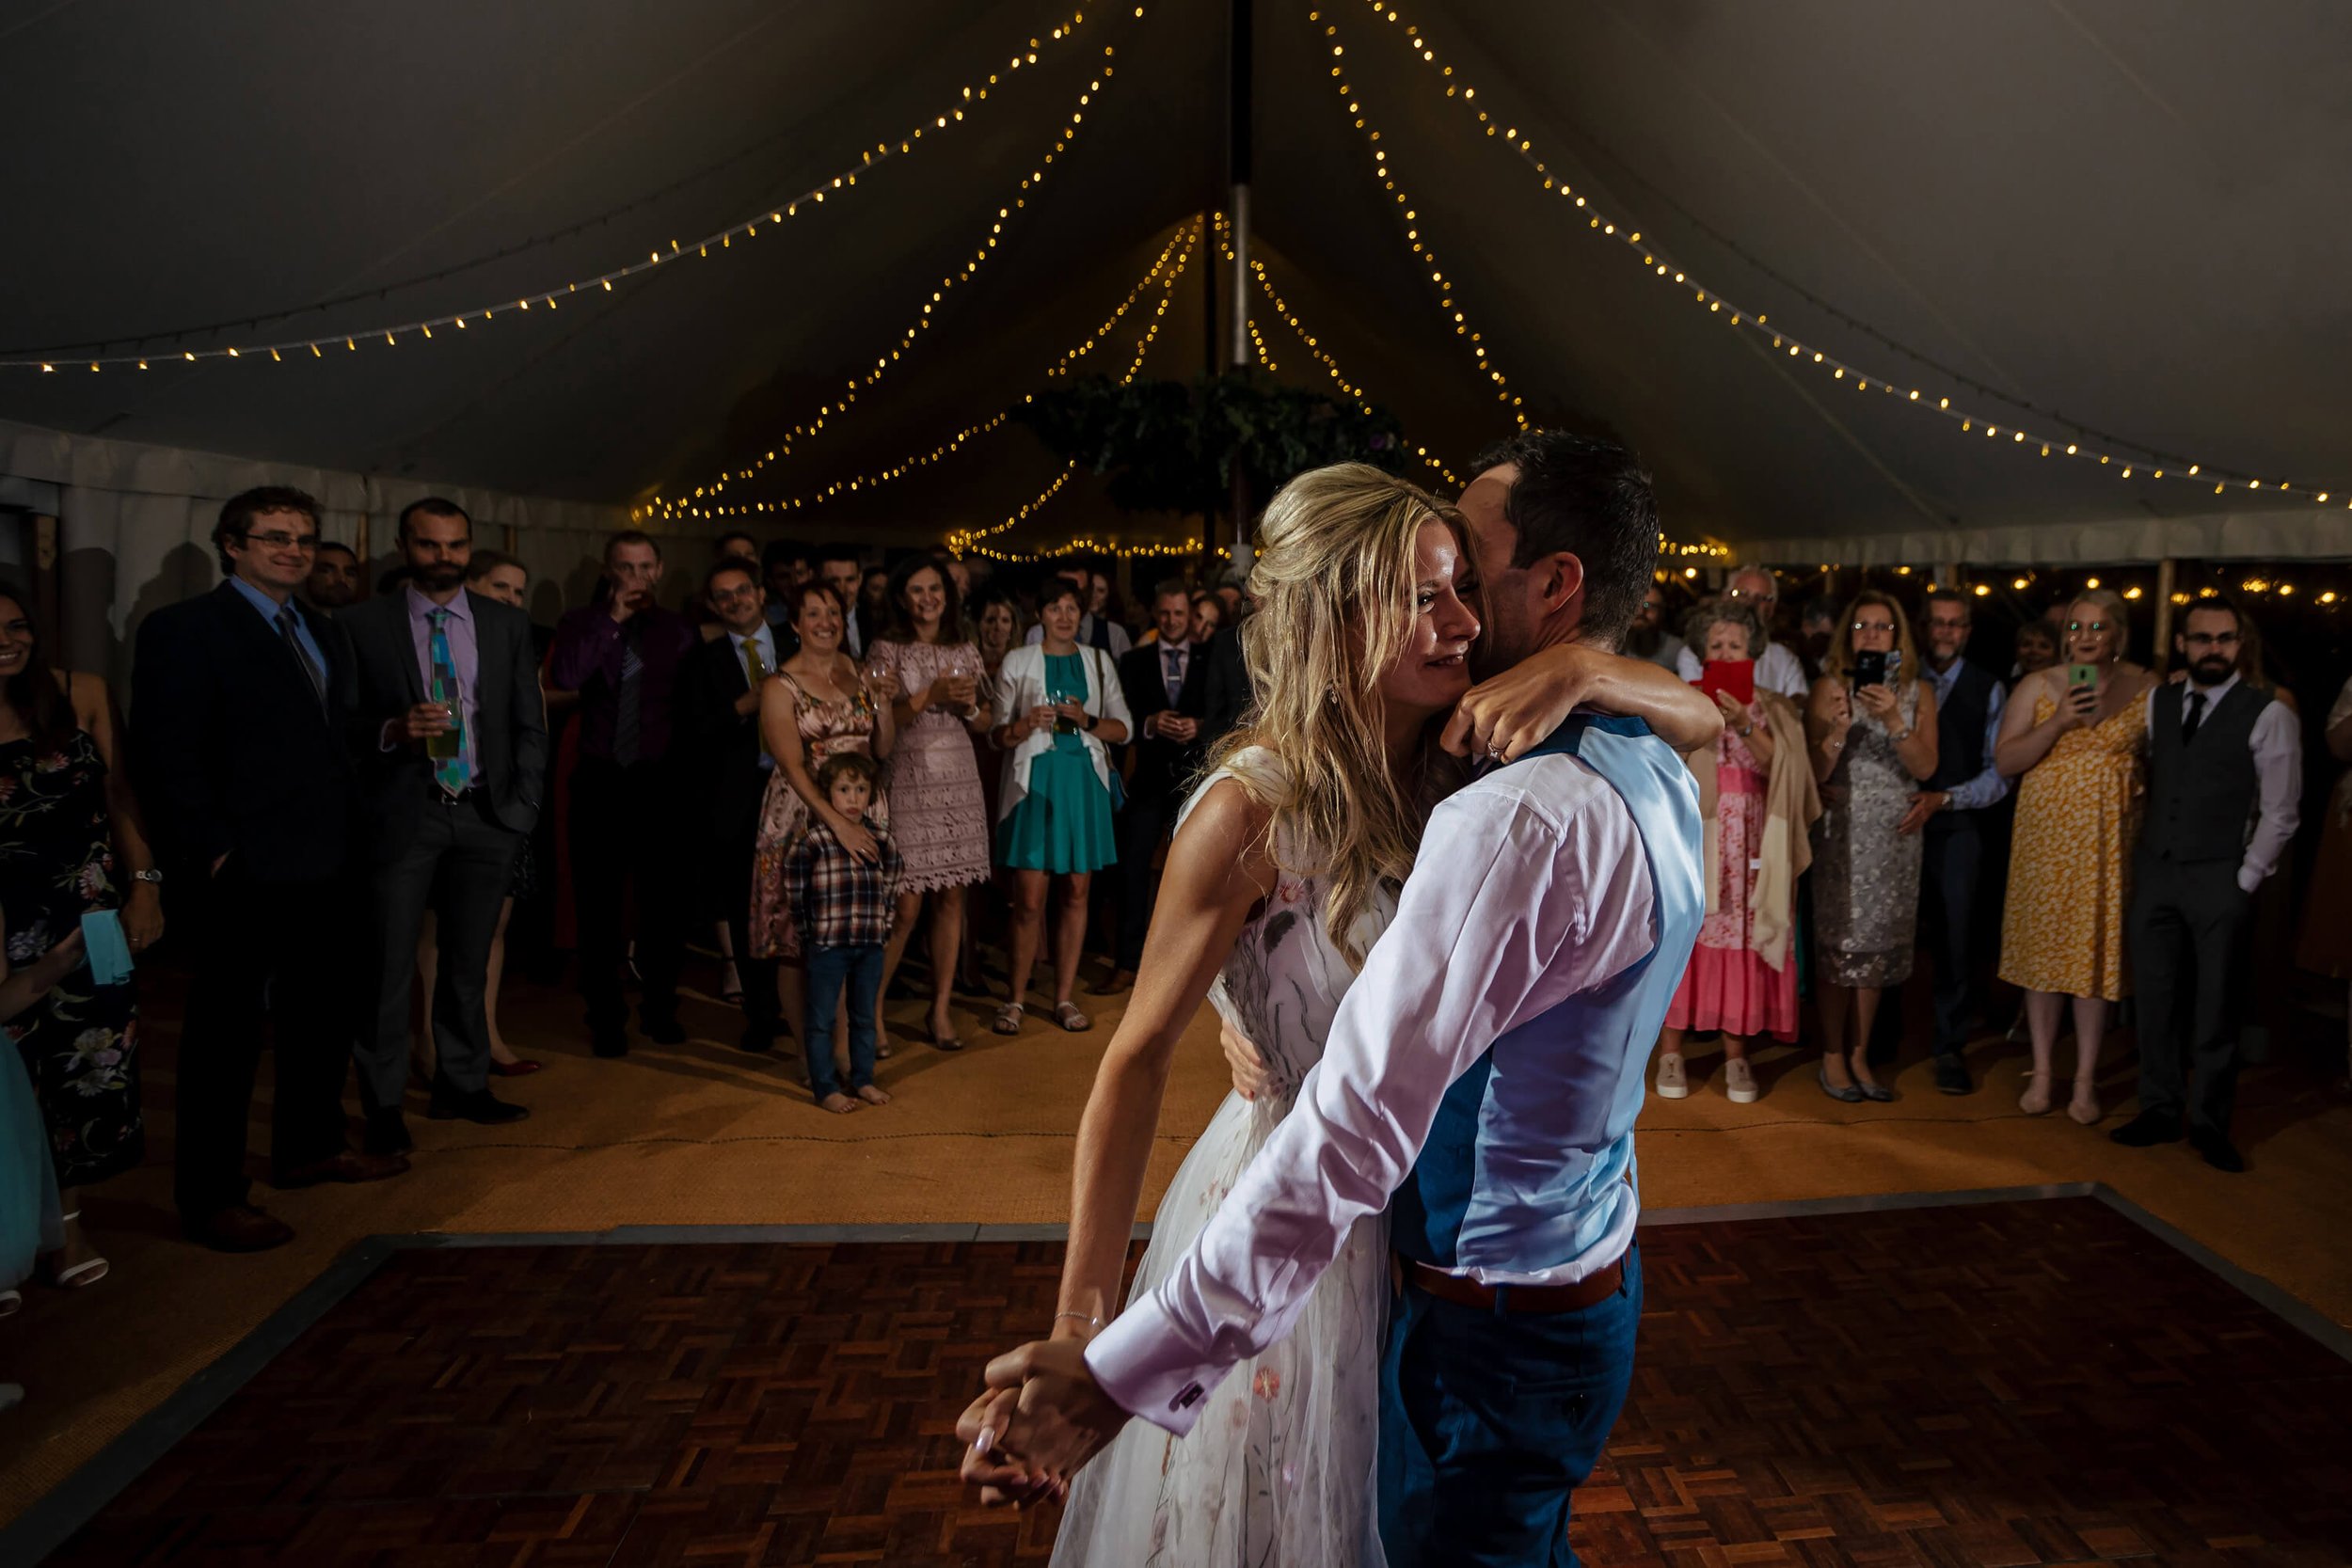 First dance as bride and groom at a Kilnsey Park wedding